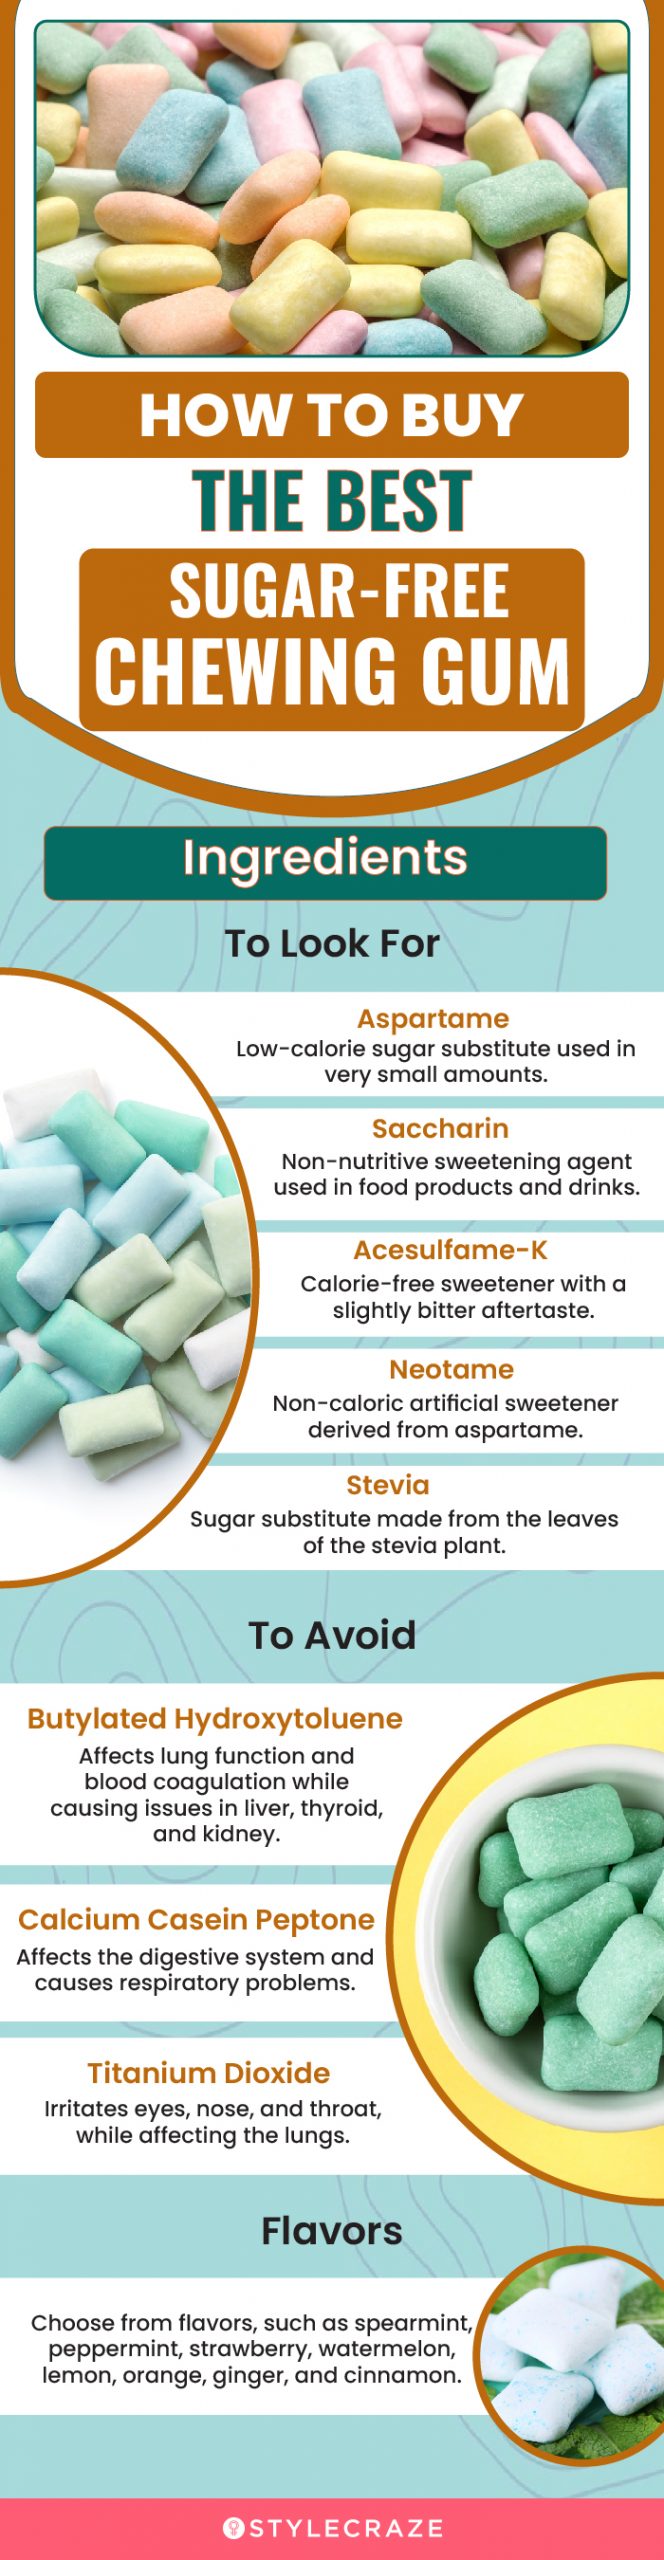 How To Buy The Best Sugar-Free Chewing Gum